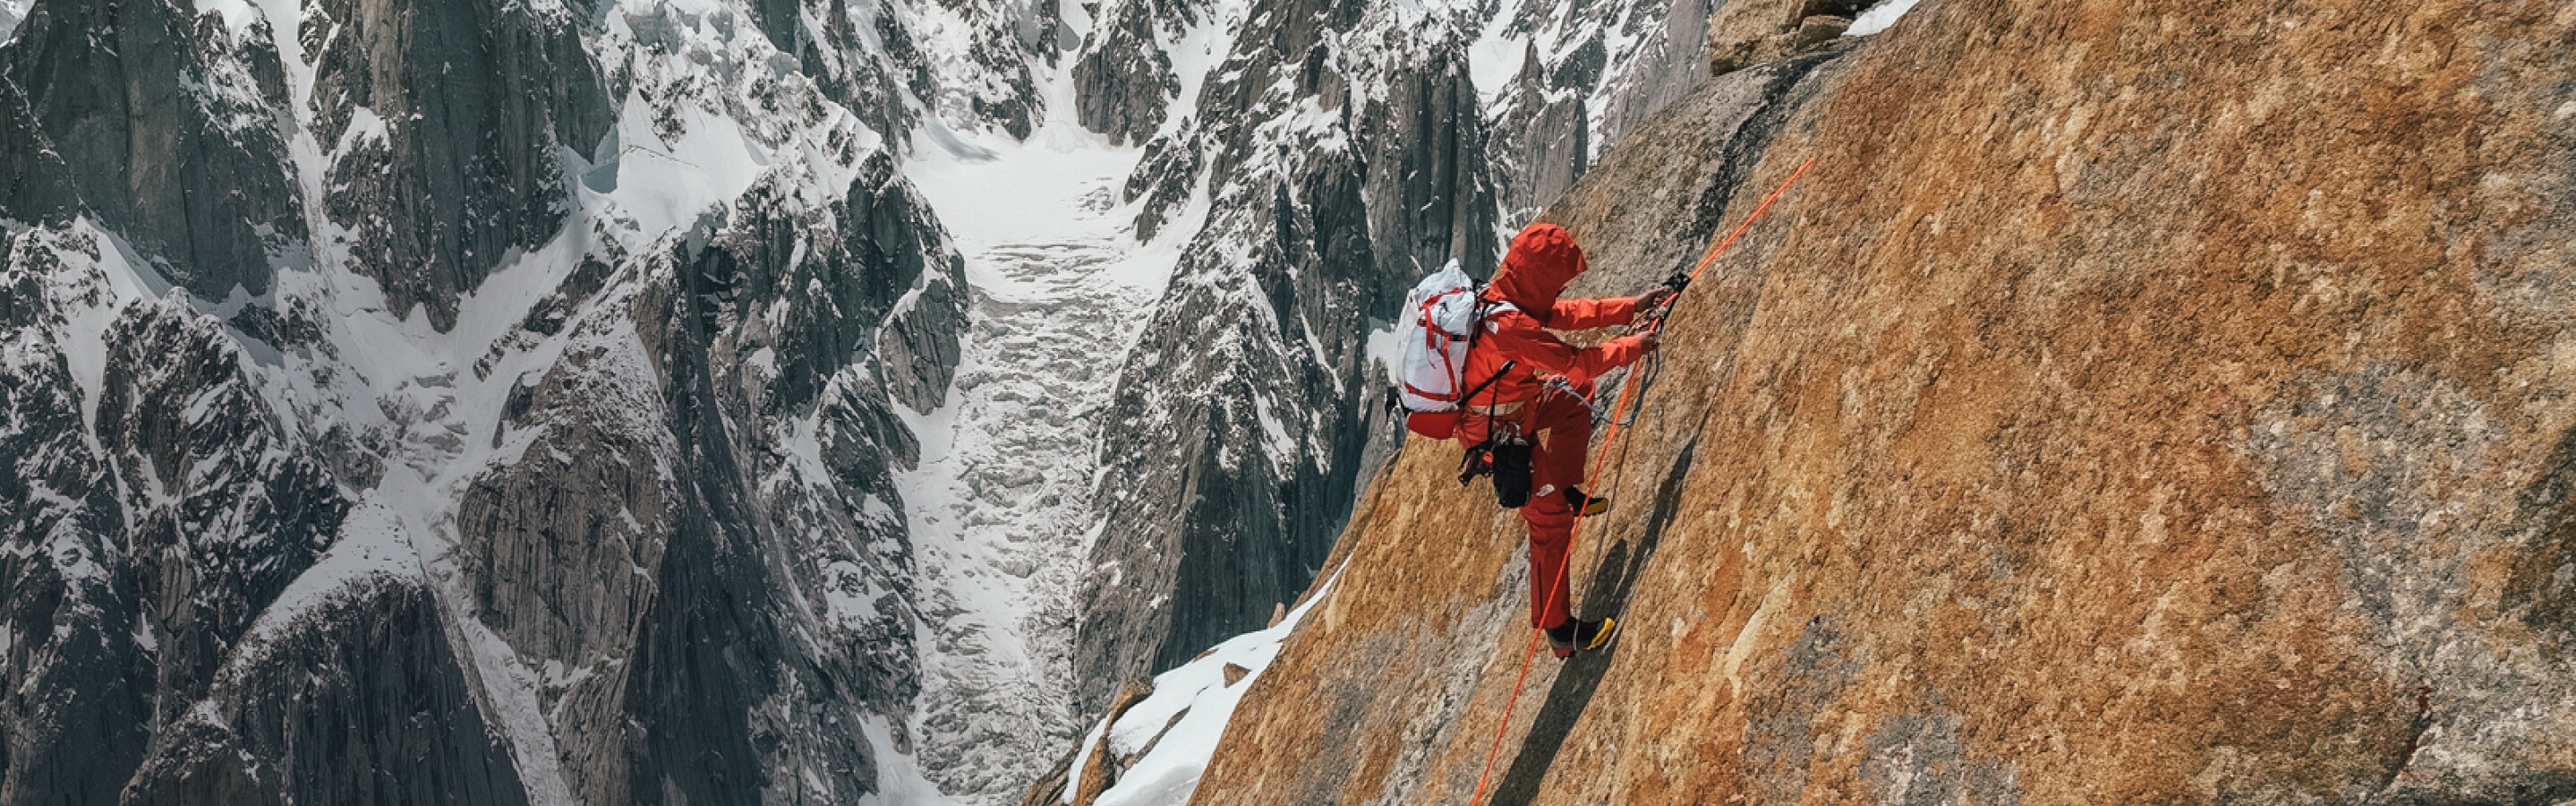 A woman winter climbs in Summit Series gear from The North Face.